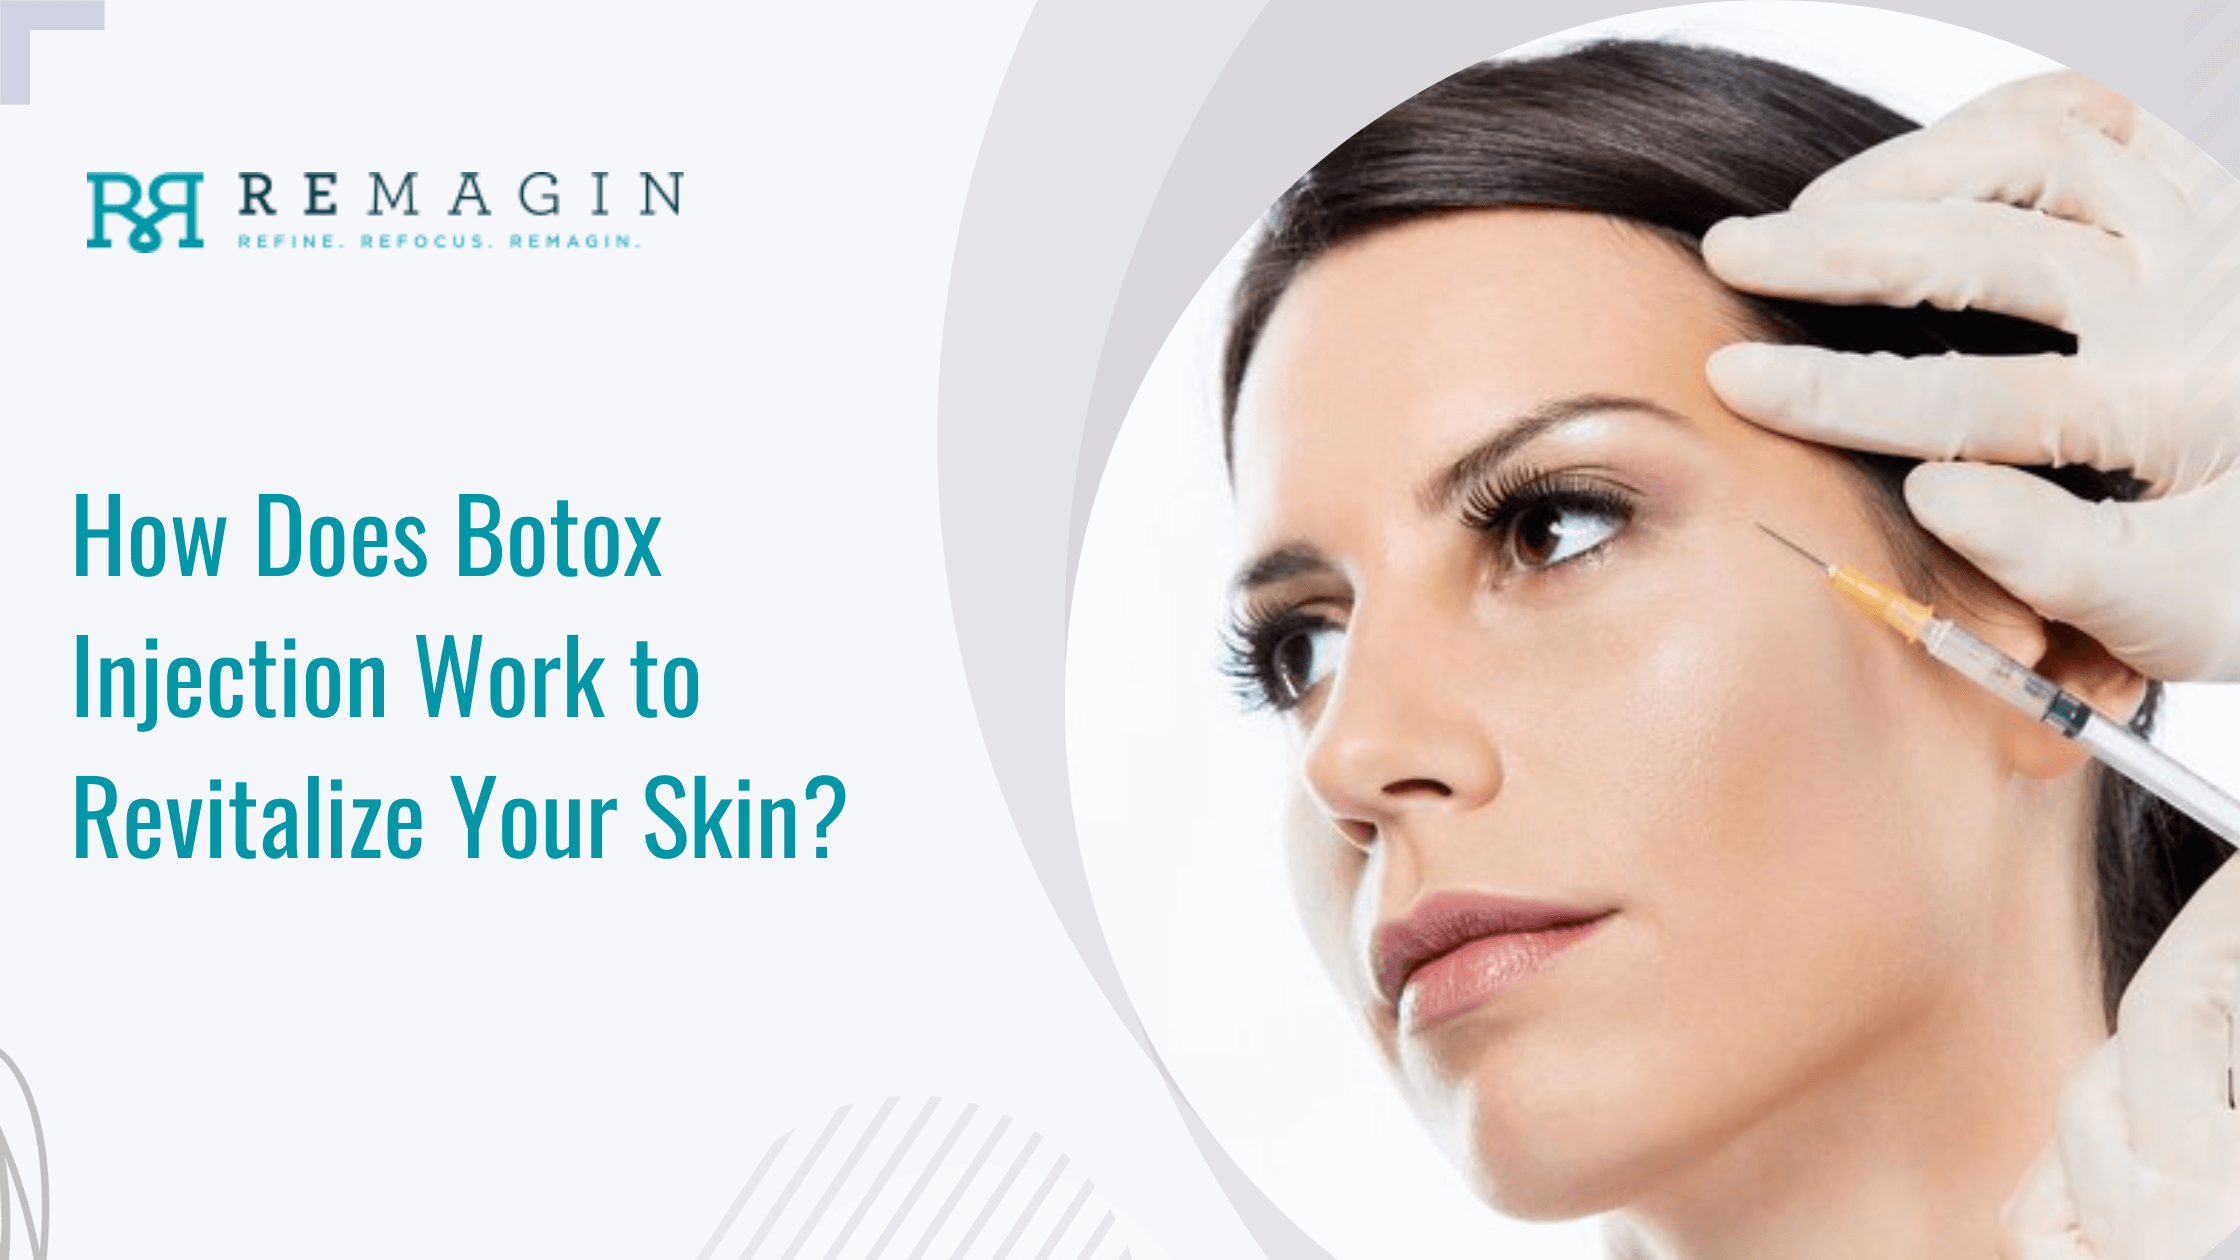 How Does Botox Injection Work to Revitalize Your Skin?